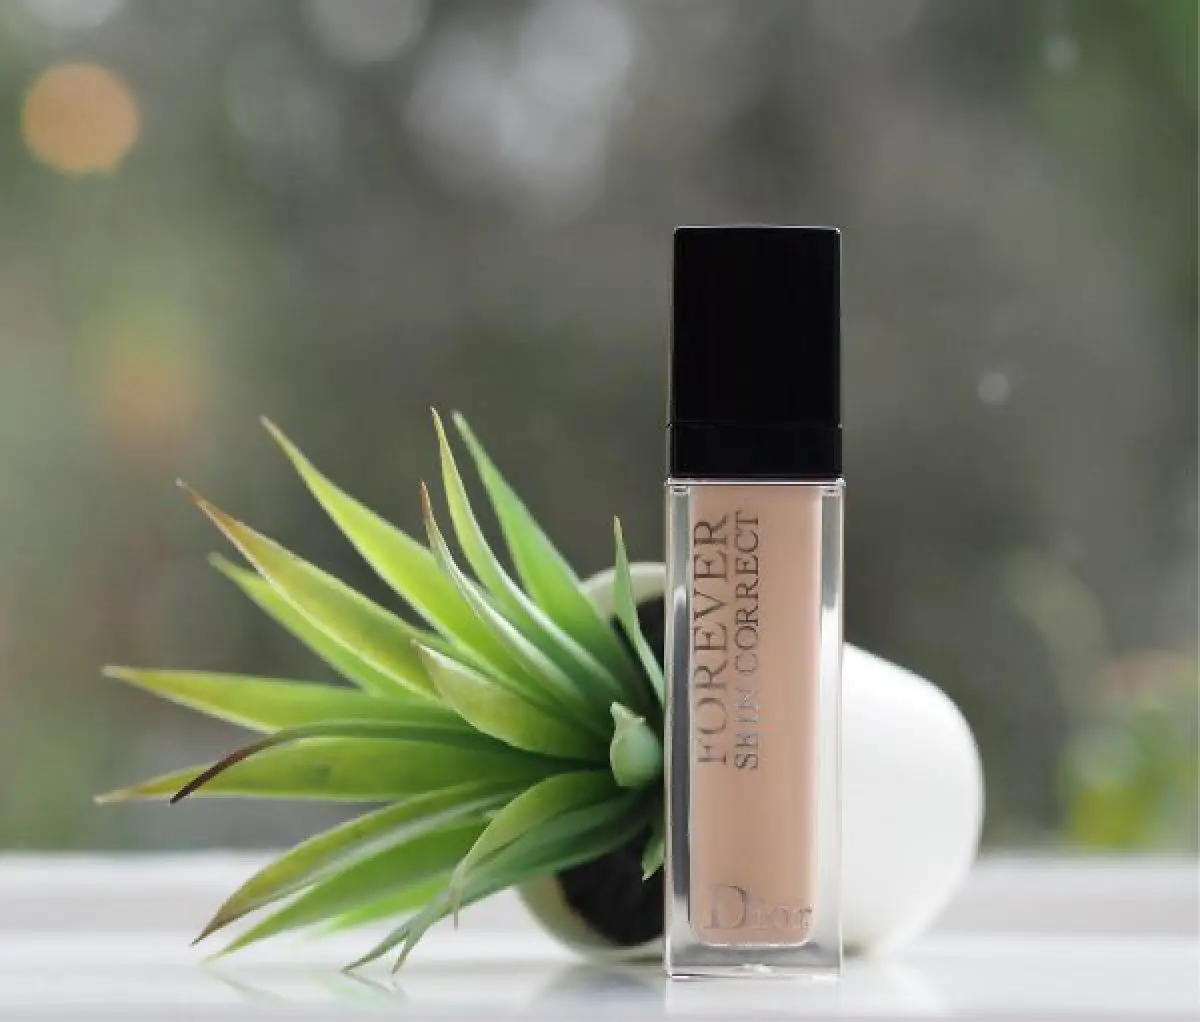 Dior  Forever 24H Matte Foundation Glow Radiant Foundation  Skin Correct  Concealer Review and Swatches  The Happy Sloths Beauty Makeup and  Skincare Blog with Reviews and Swatches